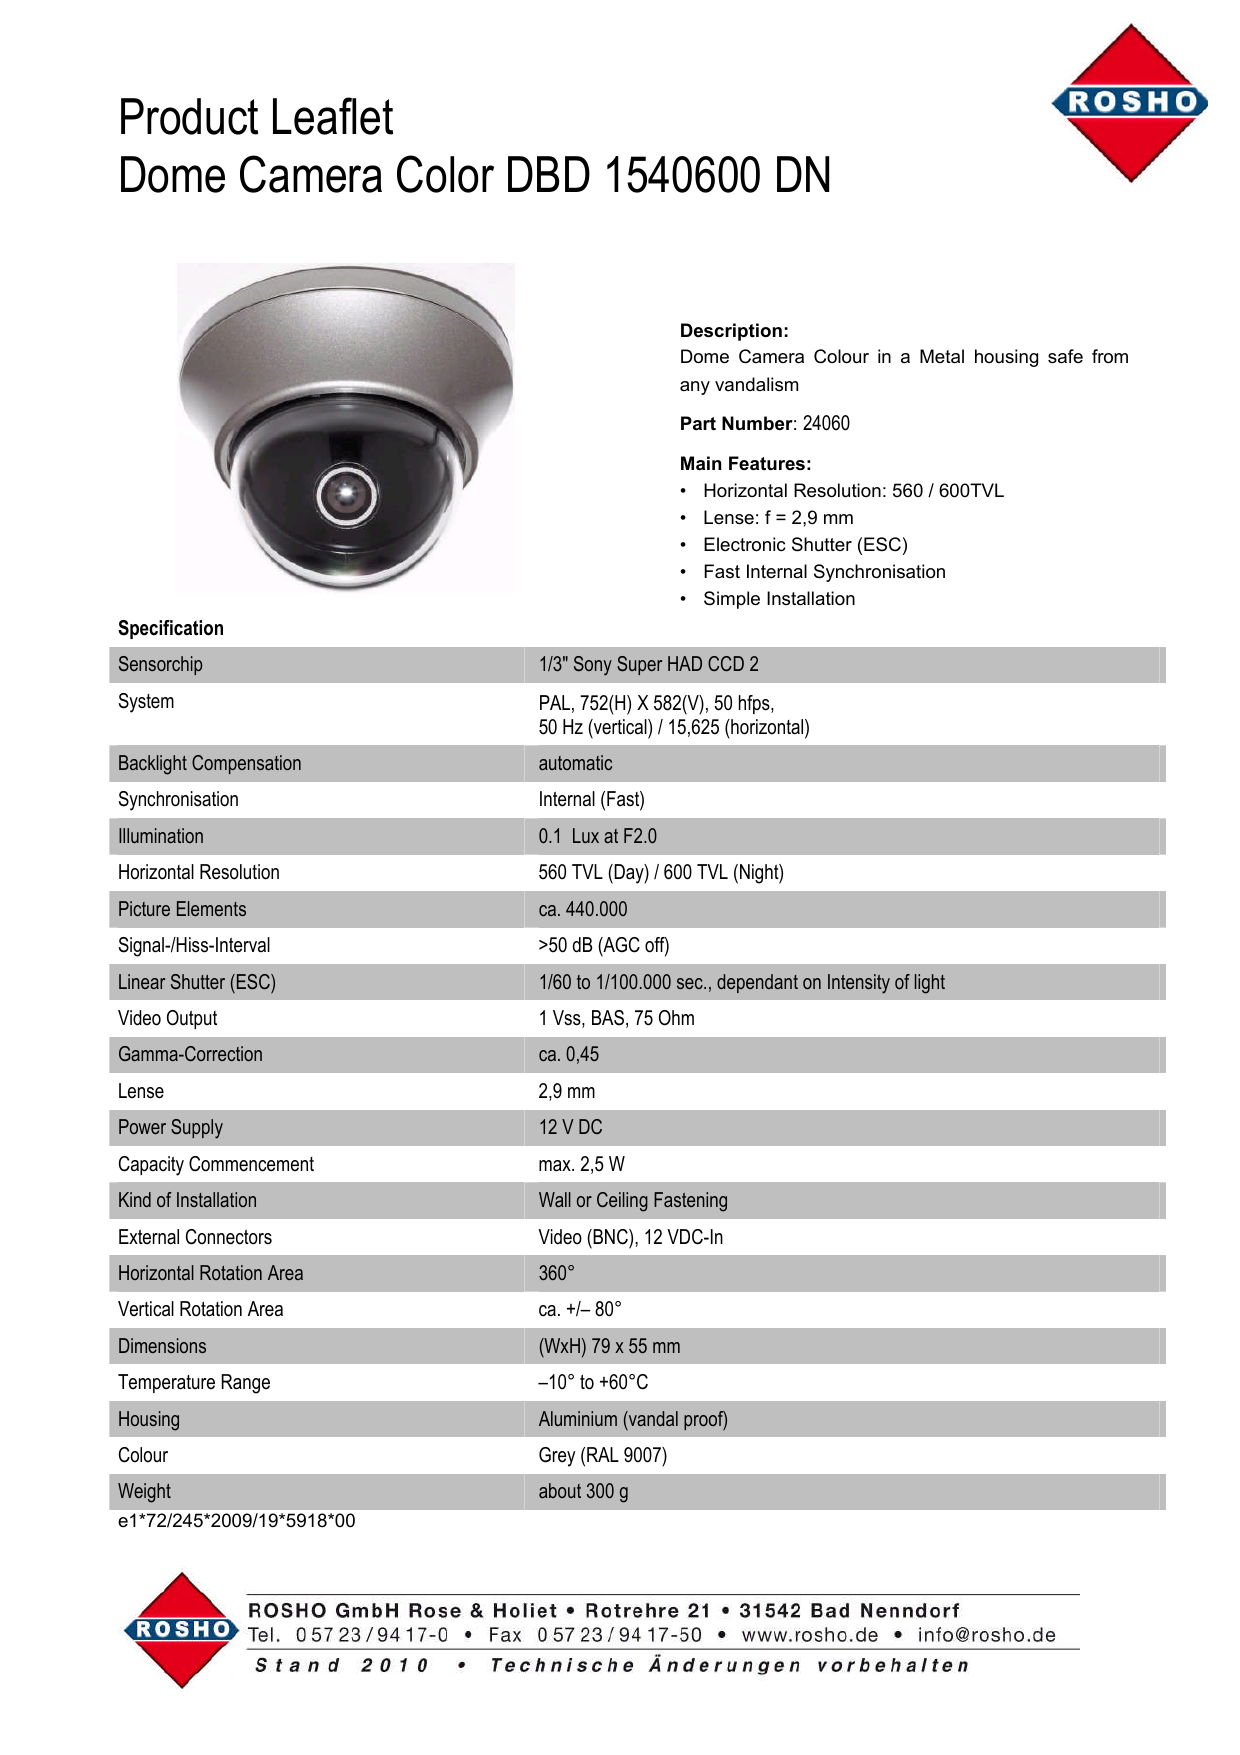 Product Leaflet Dome Camera Color Dbd Dn Manualzz